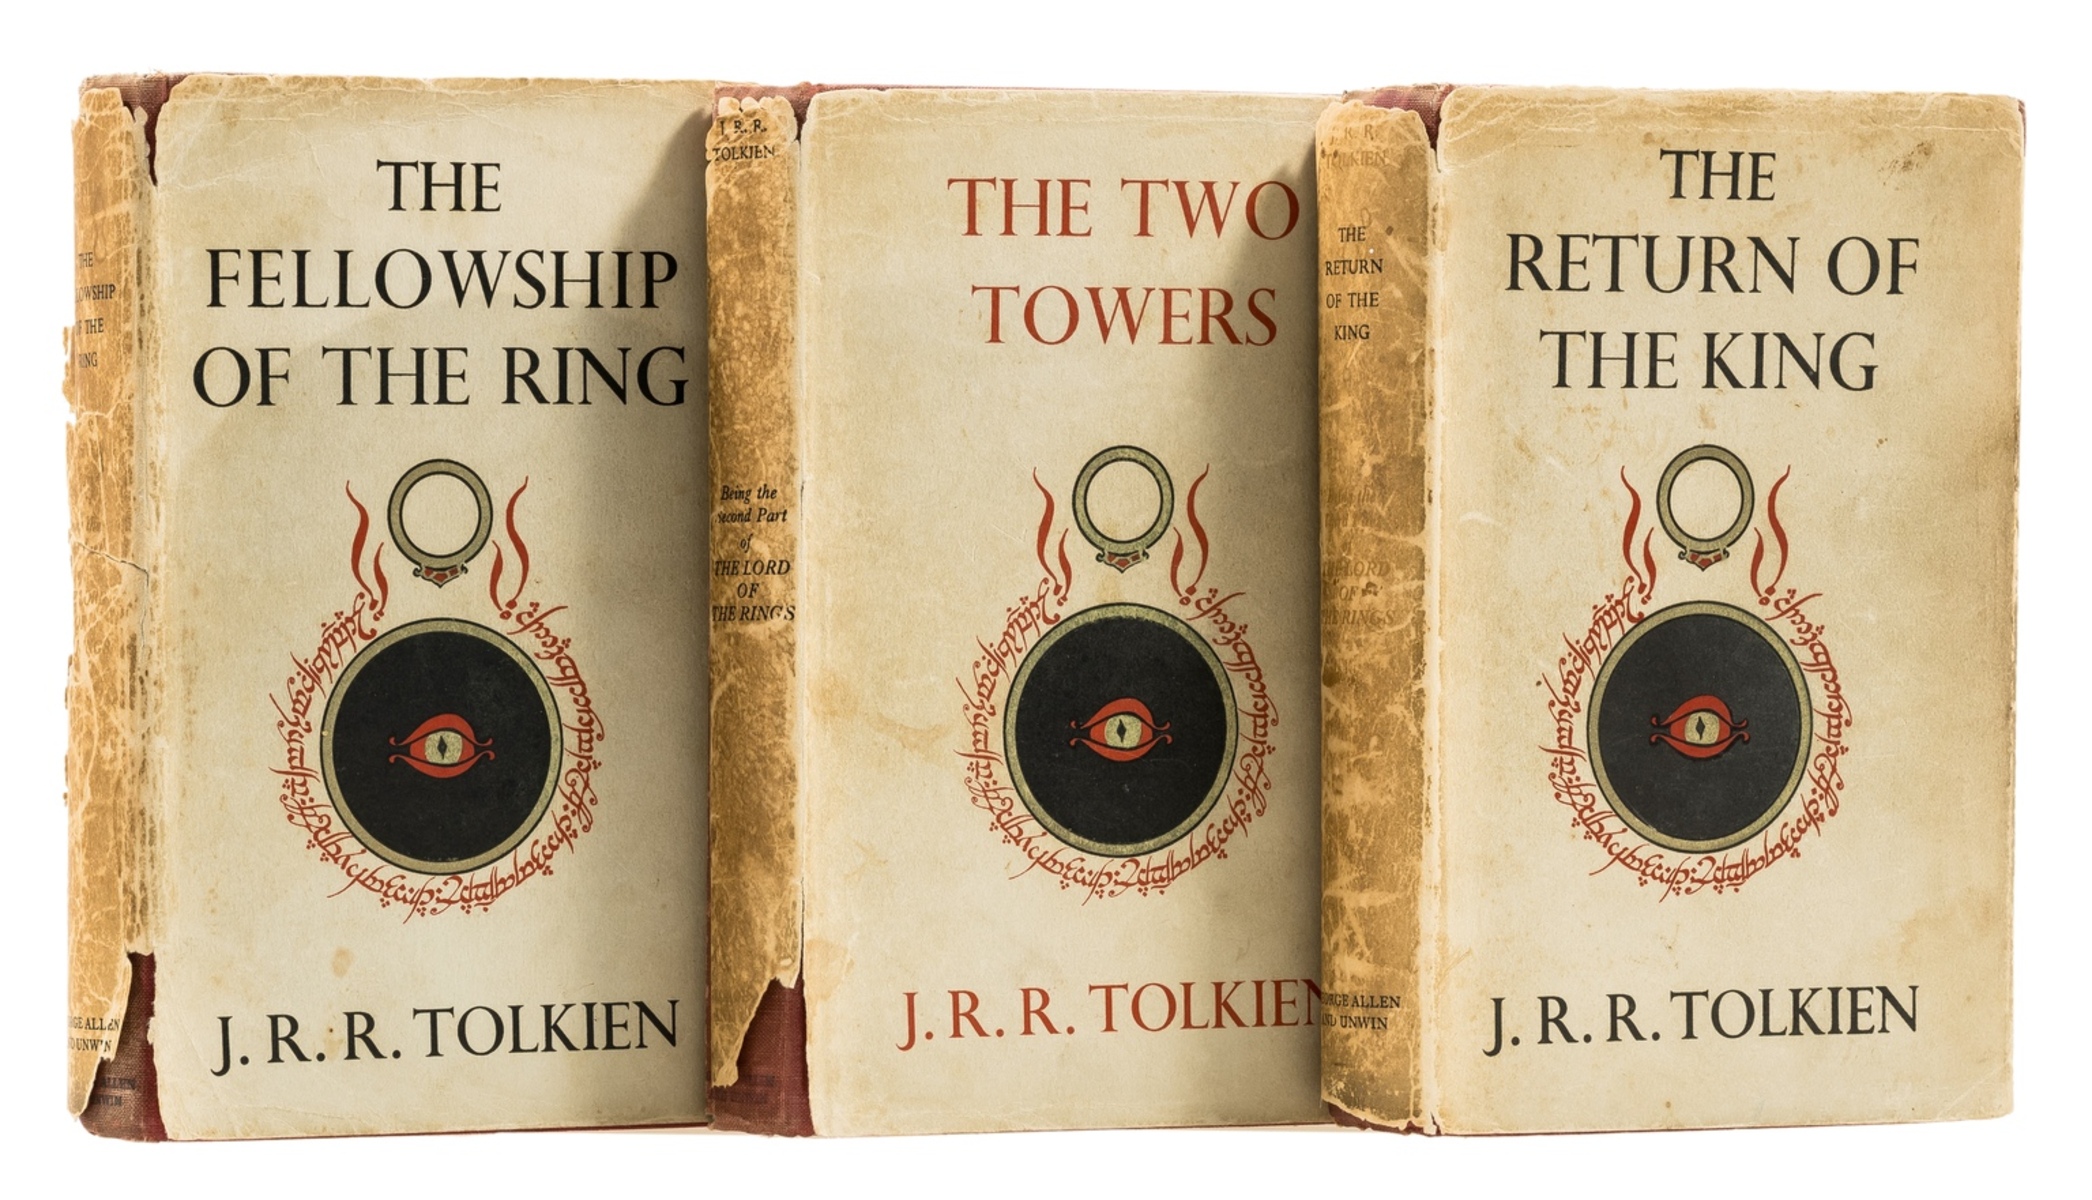 Tolkien (J.R.R.) The Lord of the Rings, 3 vol., first editions, fifth, second and first …